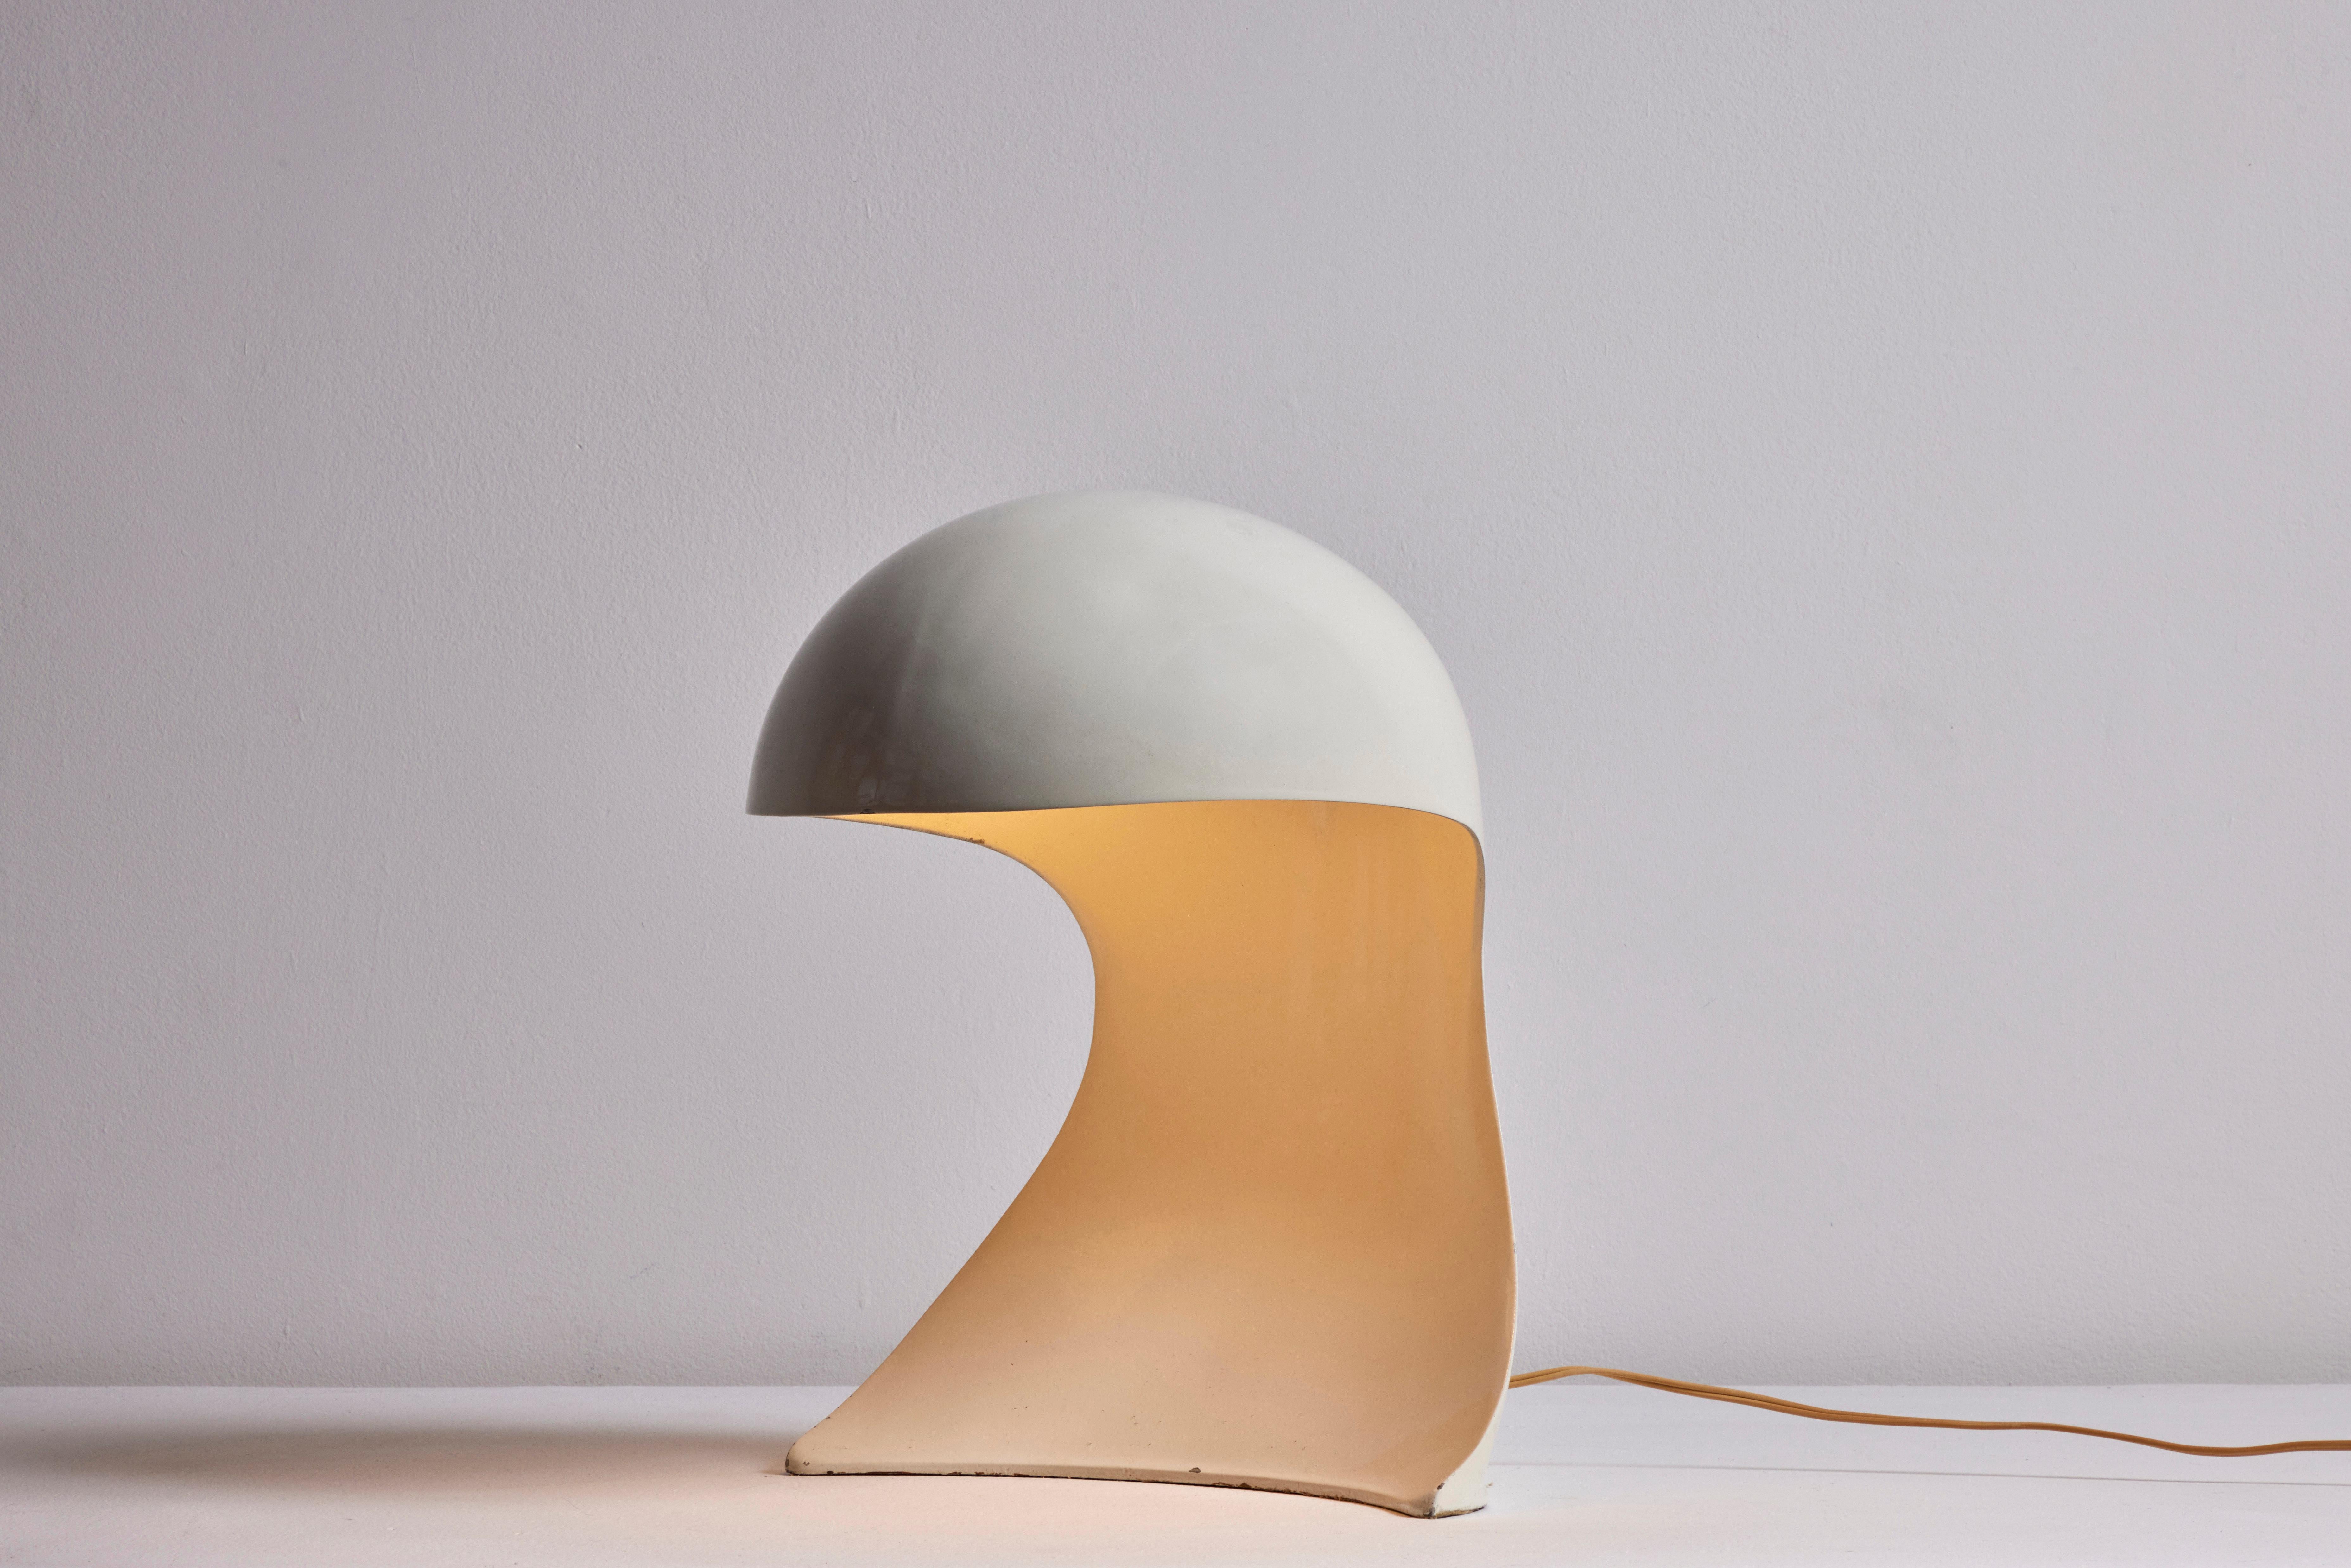 Dania table lamp by Dario Tognon and Studio Celli for Artemide. Manufactured in Italy, circa 1960's. Enameled metal, original European cord. We recommend one E27 60w maximum bulb. Bulb not included.